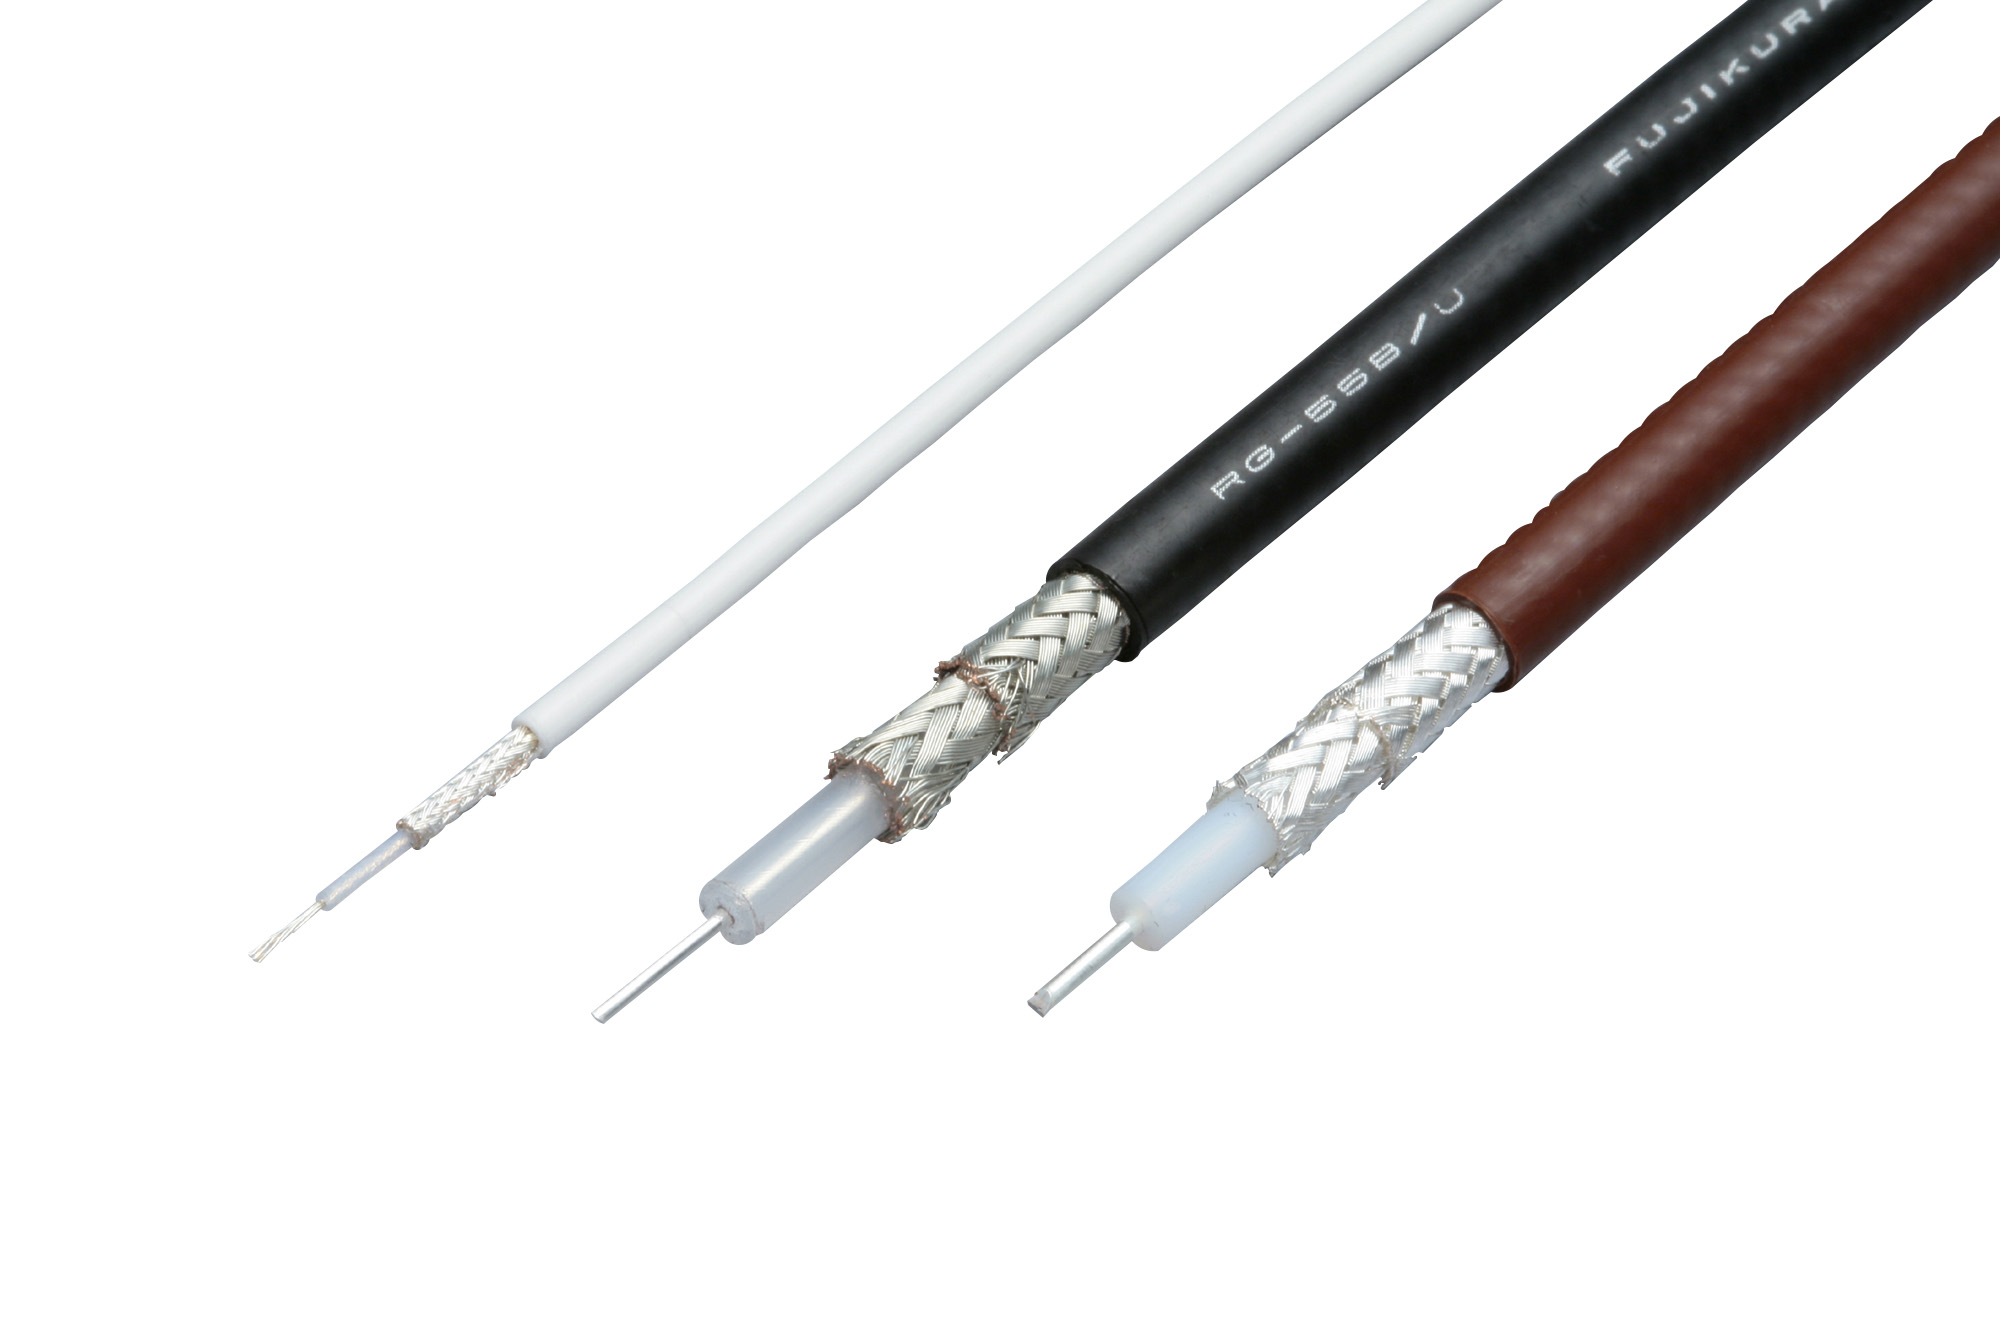 RG Type High Frequency Coaxial Cable (RG-58AU-50) 